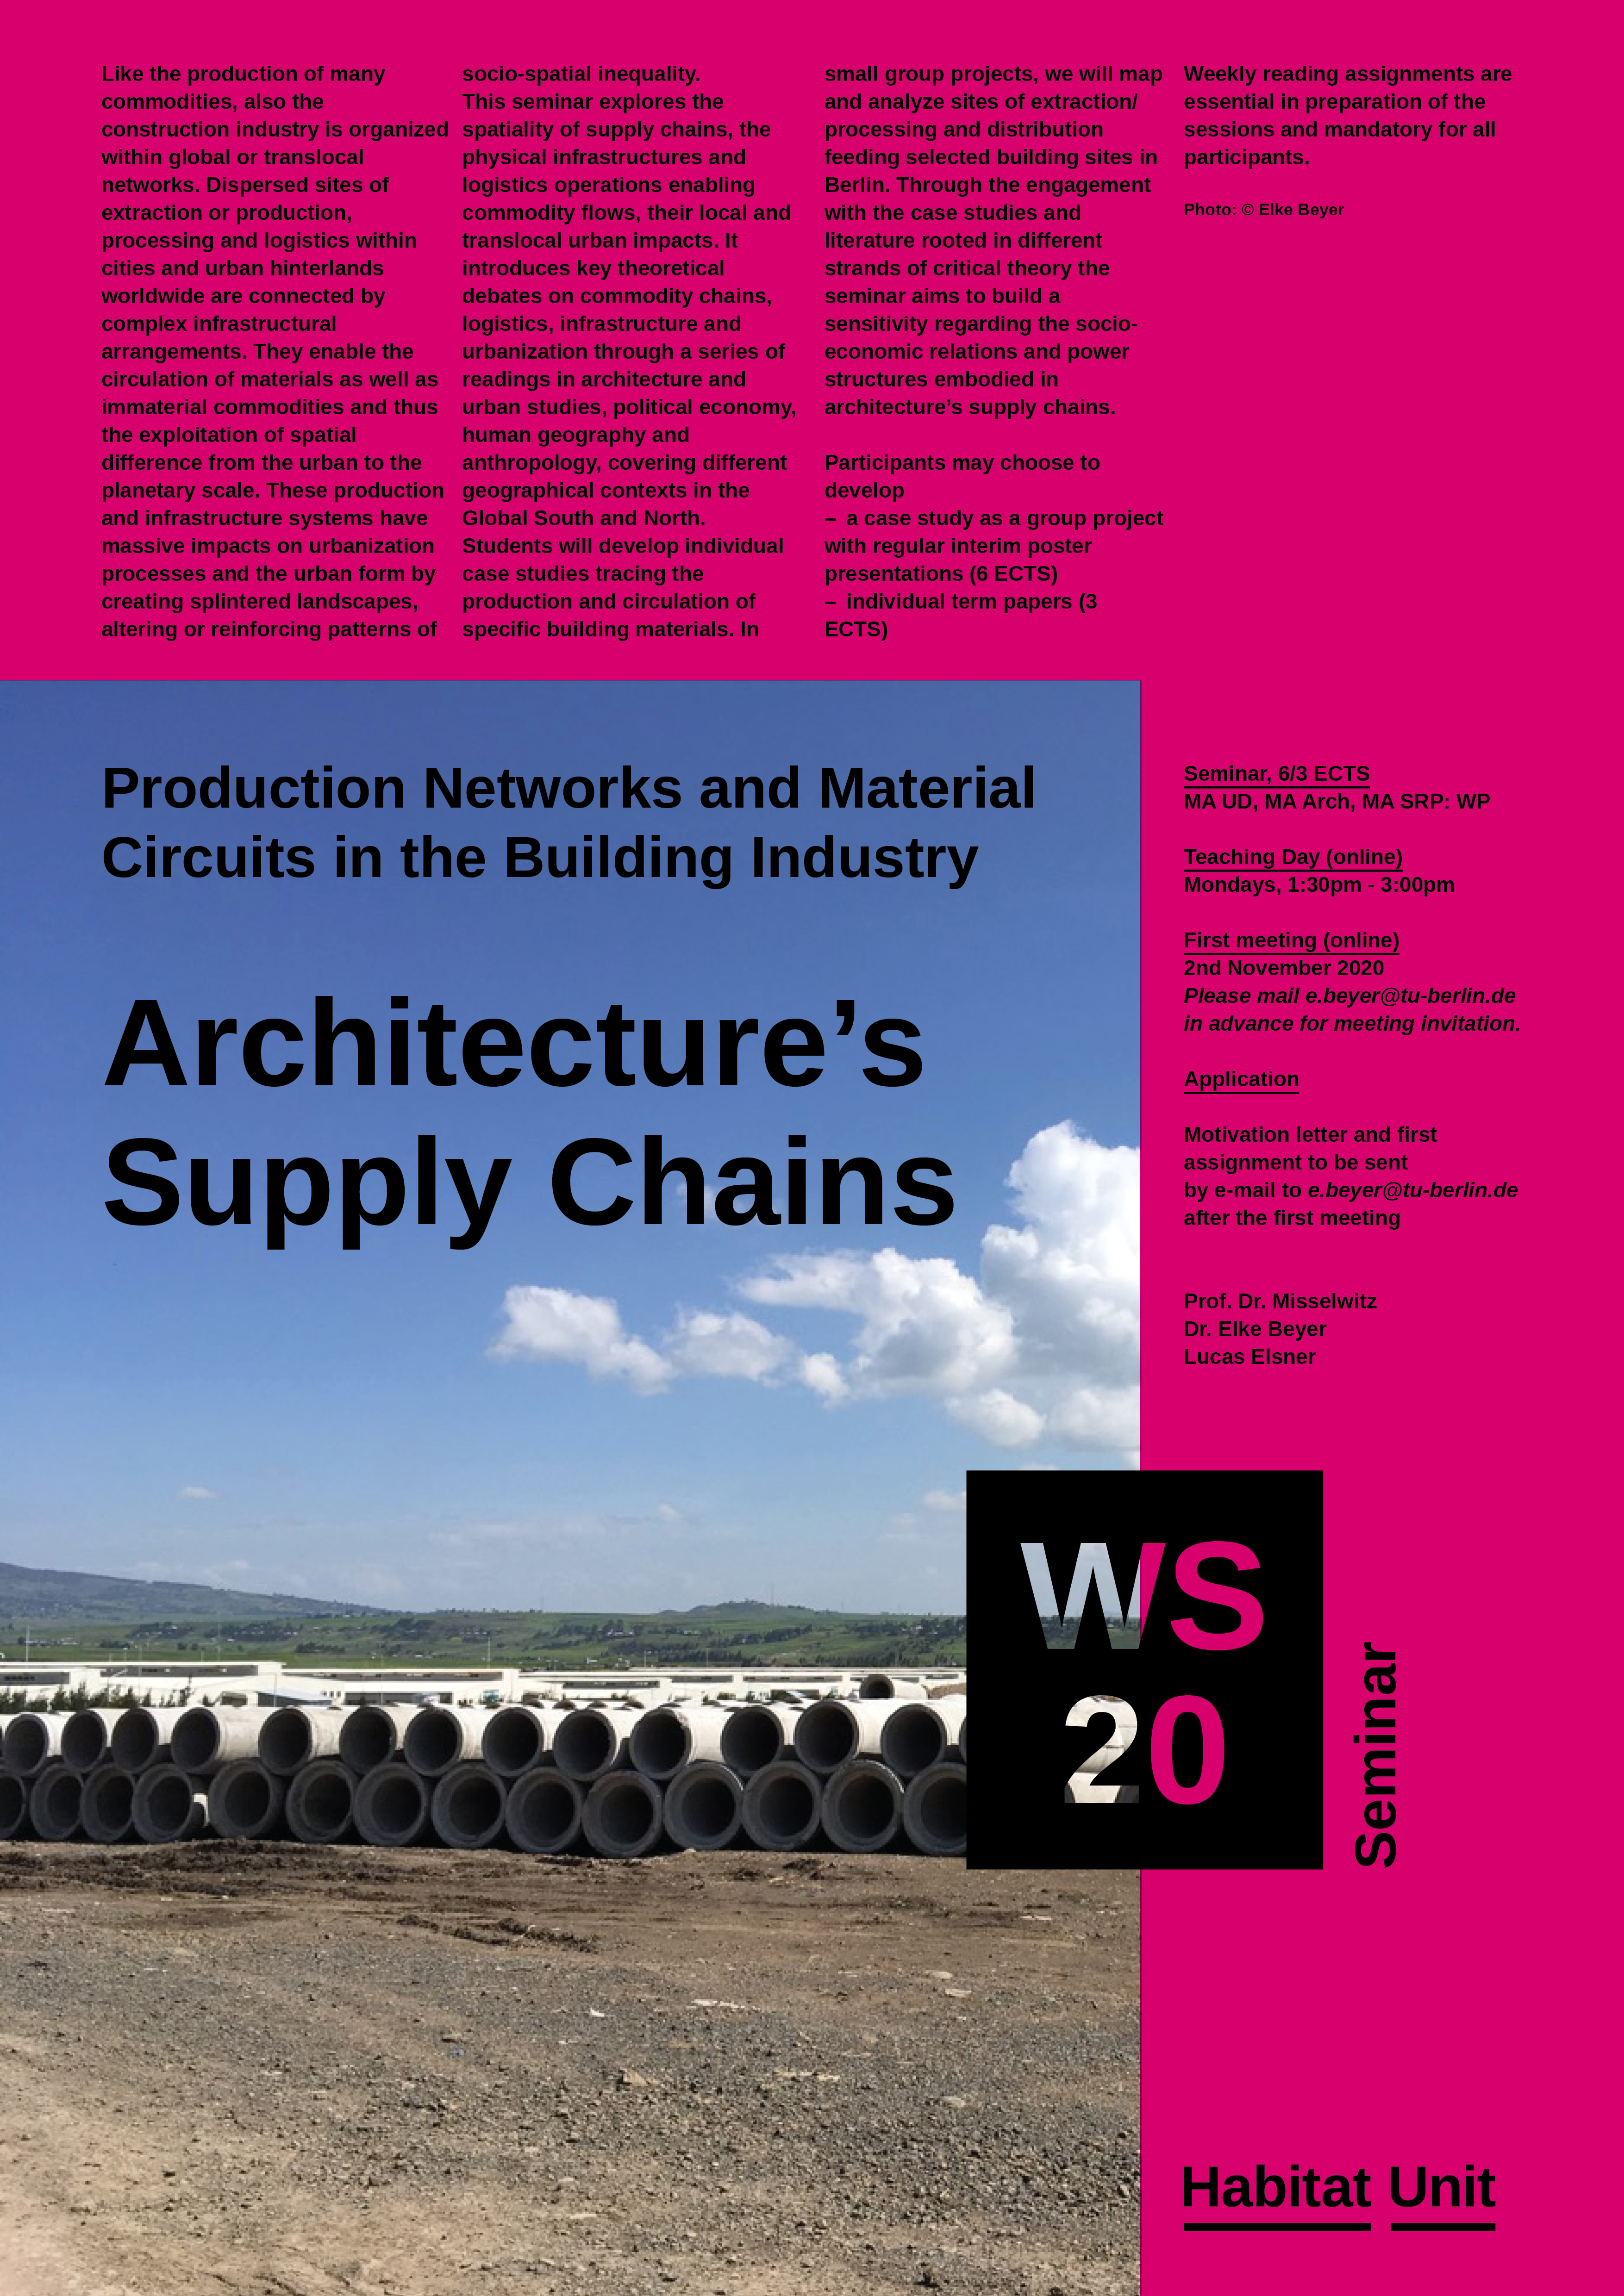 Architectures Supply Chains Poster